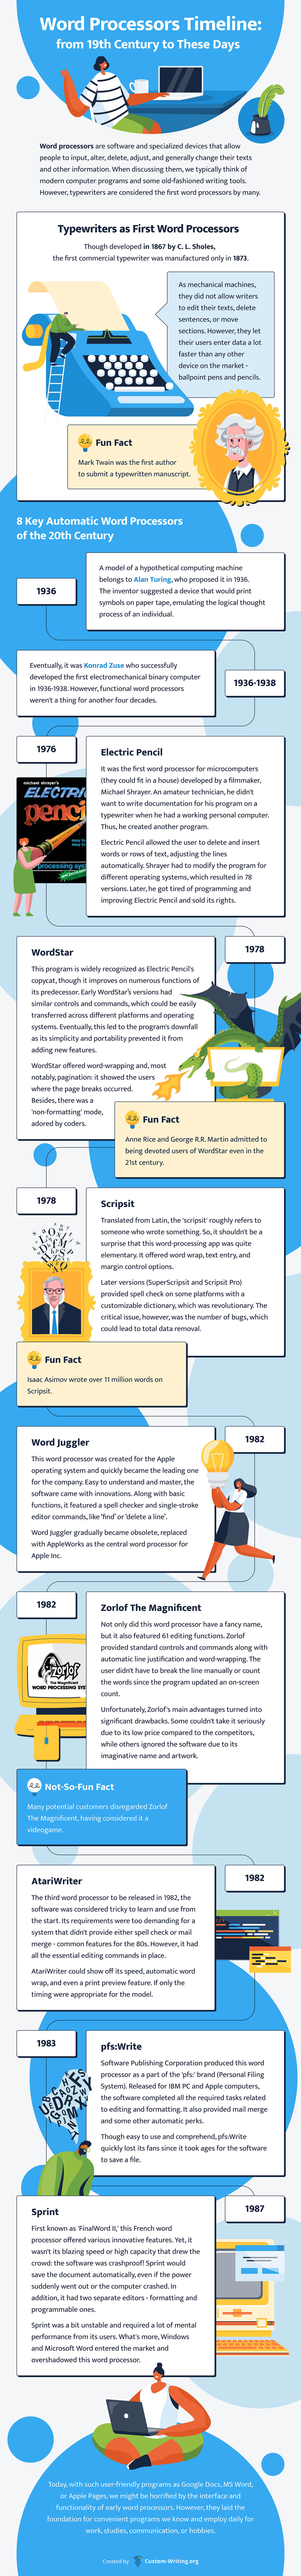 In this infographic, our team explores the history of word processors, starting from the first automatic writing tool.